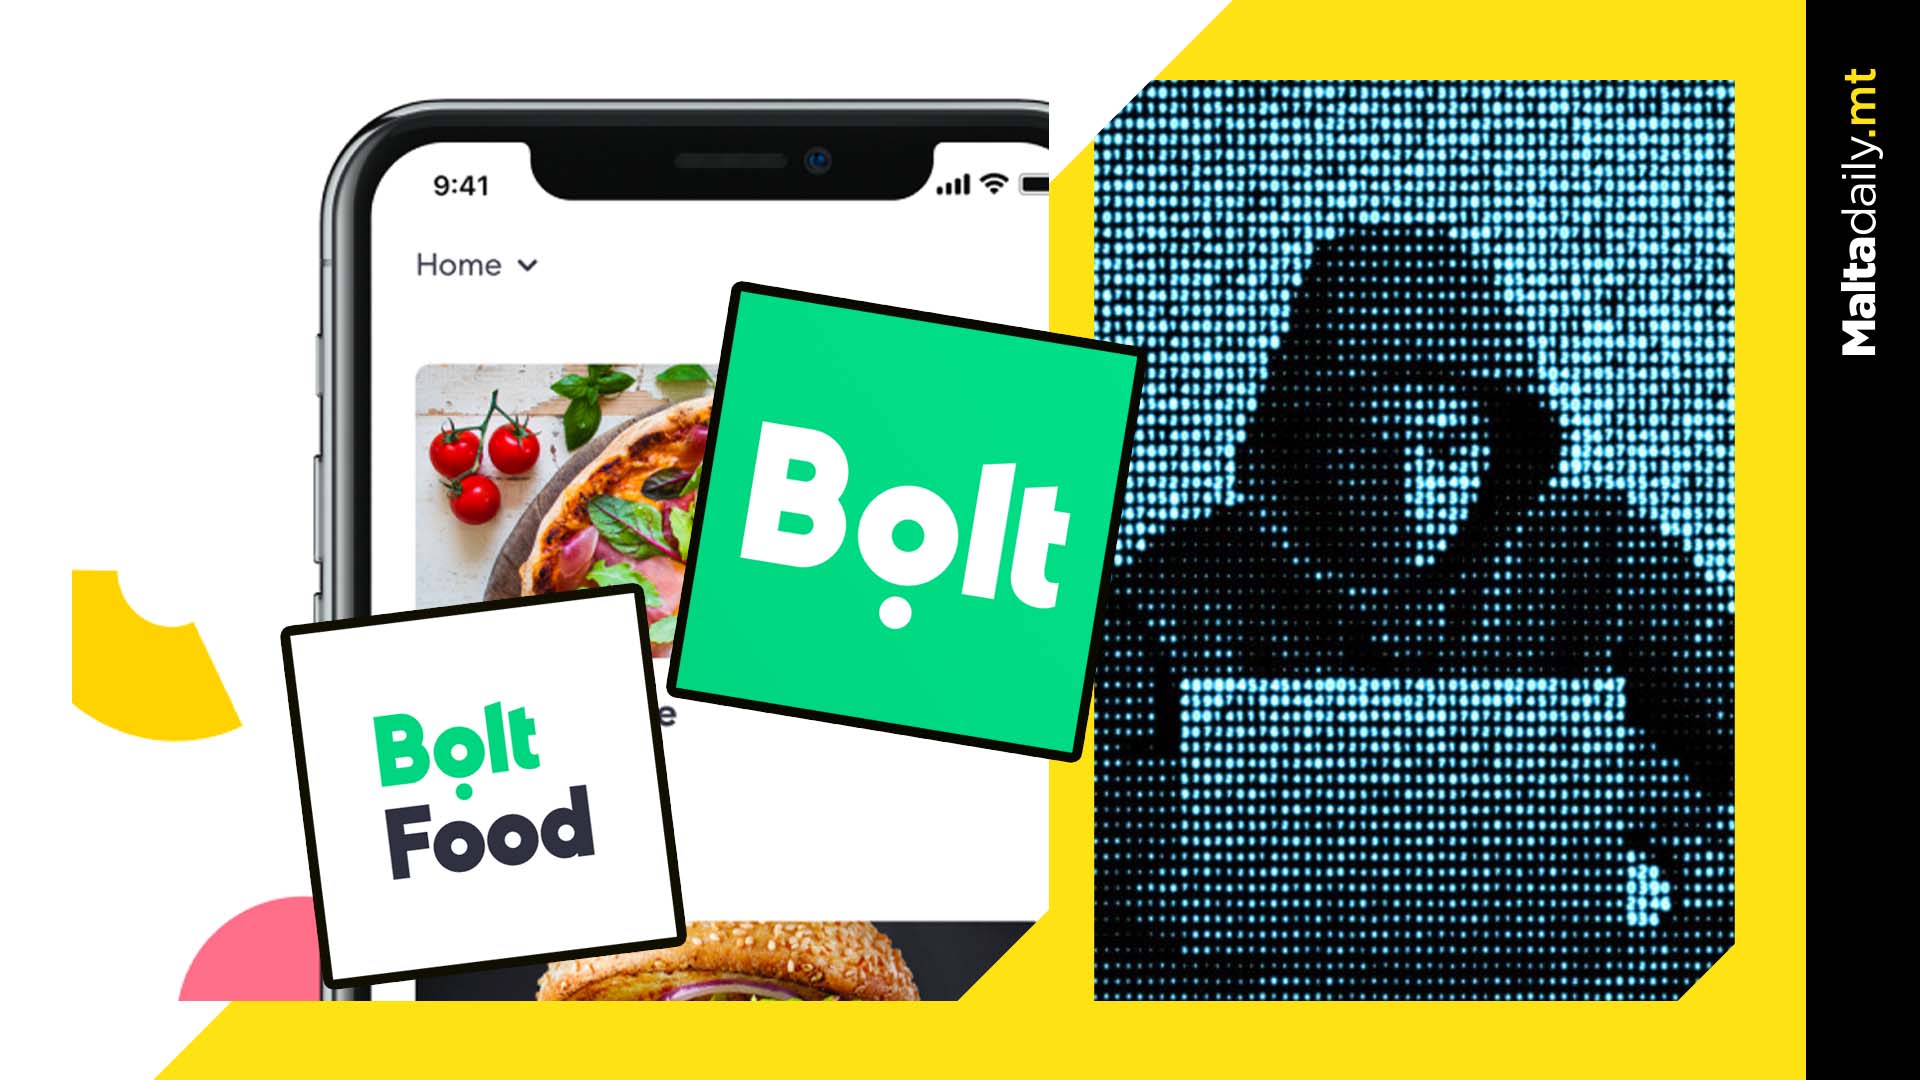 All OK with Bolt Apps: No cyber crime took place